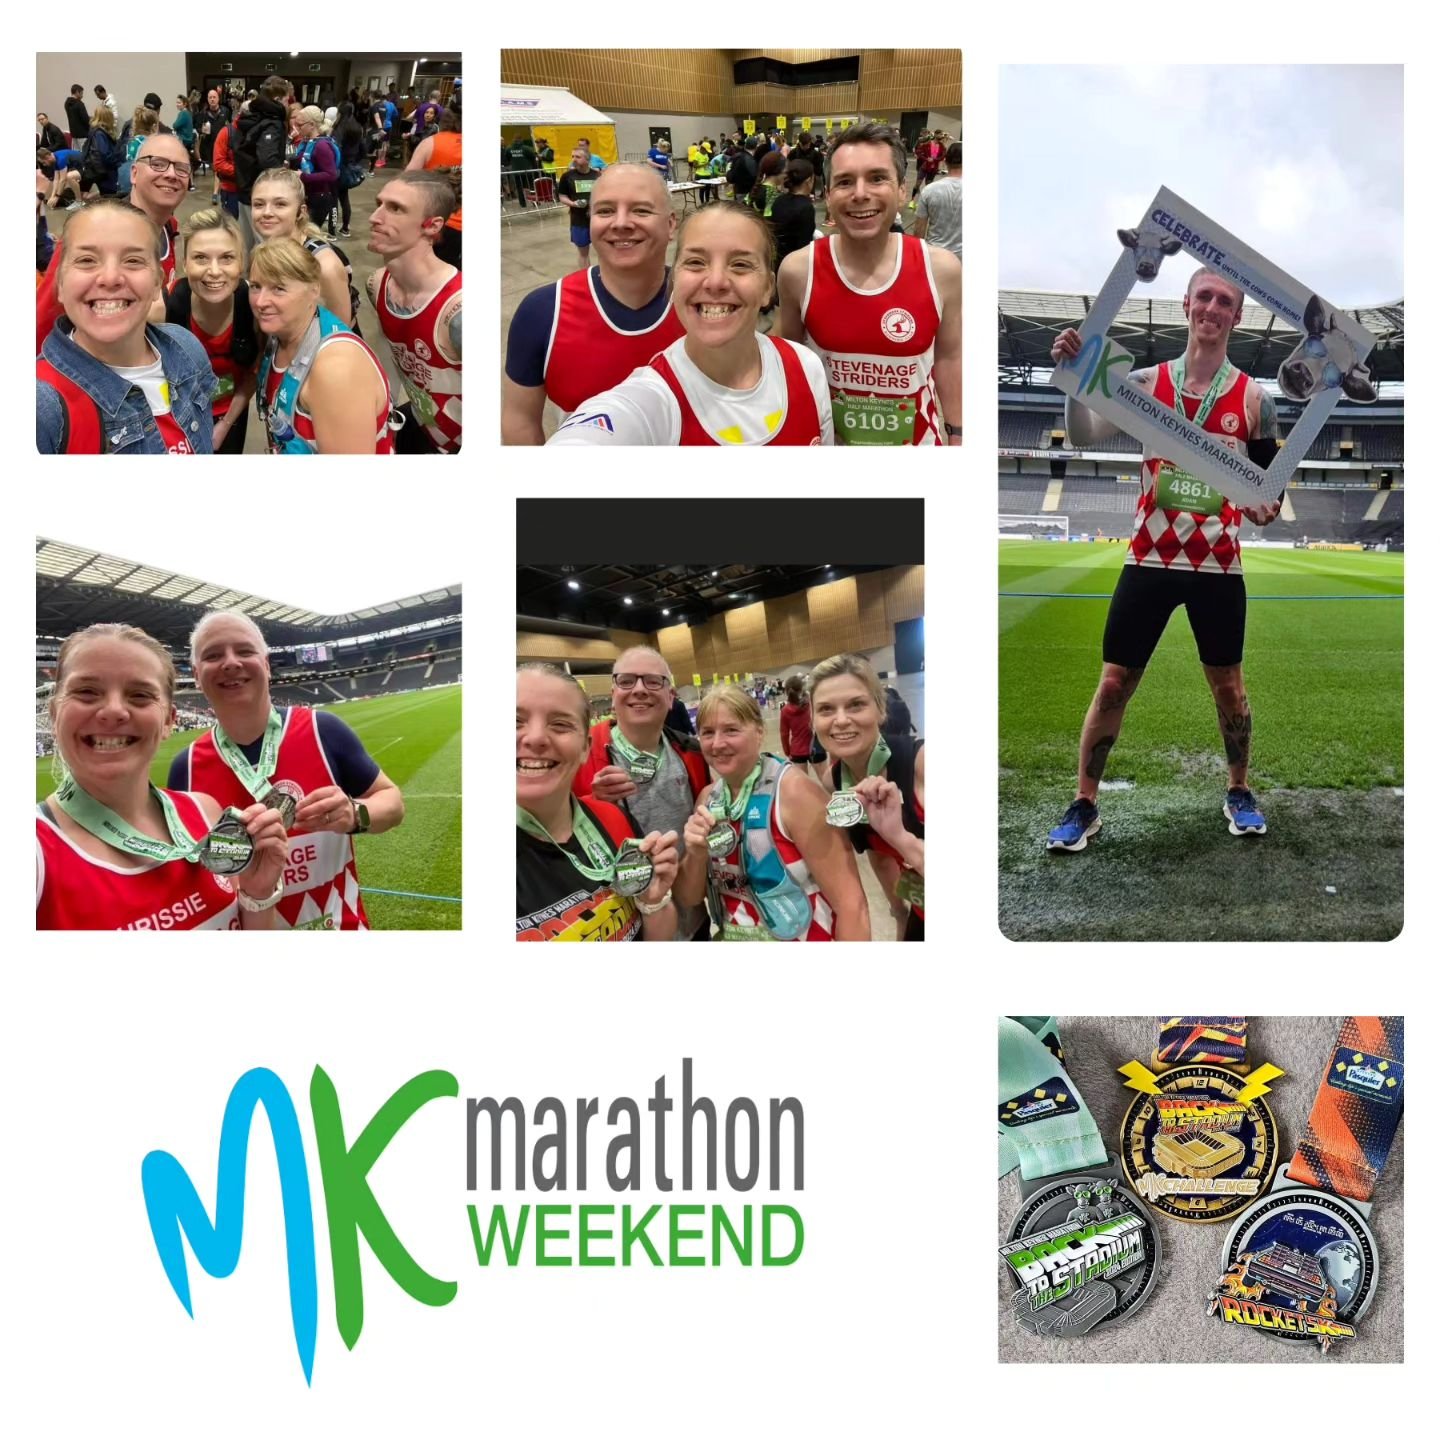 This weekend was the @mkmarathon weekend with a Rocket 5k, Half marathon and a Marathon on offer.

On Sunday Adam Hough took on the Rocket 5k and he finished in a truly fantastic time of 17:54, a new PB&nbsp;for Adam.

There were several Striders tak